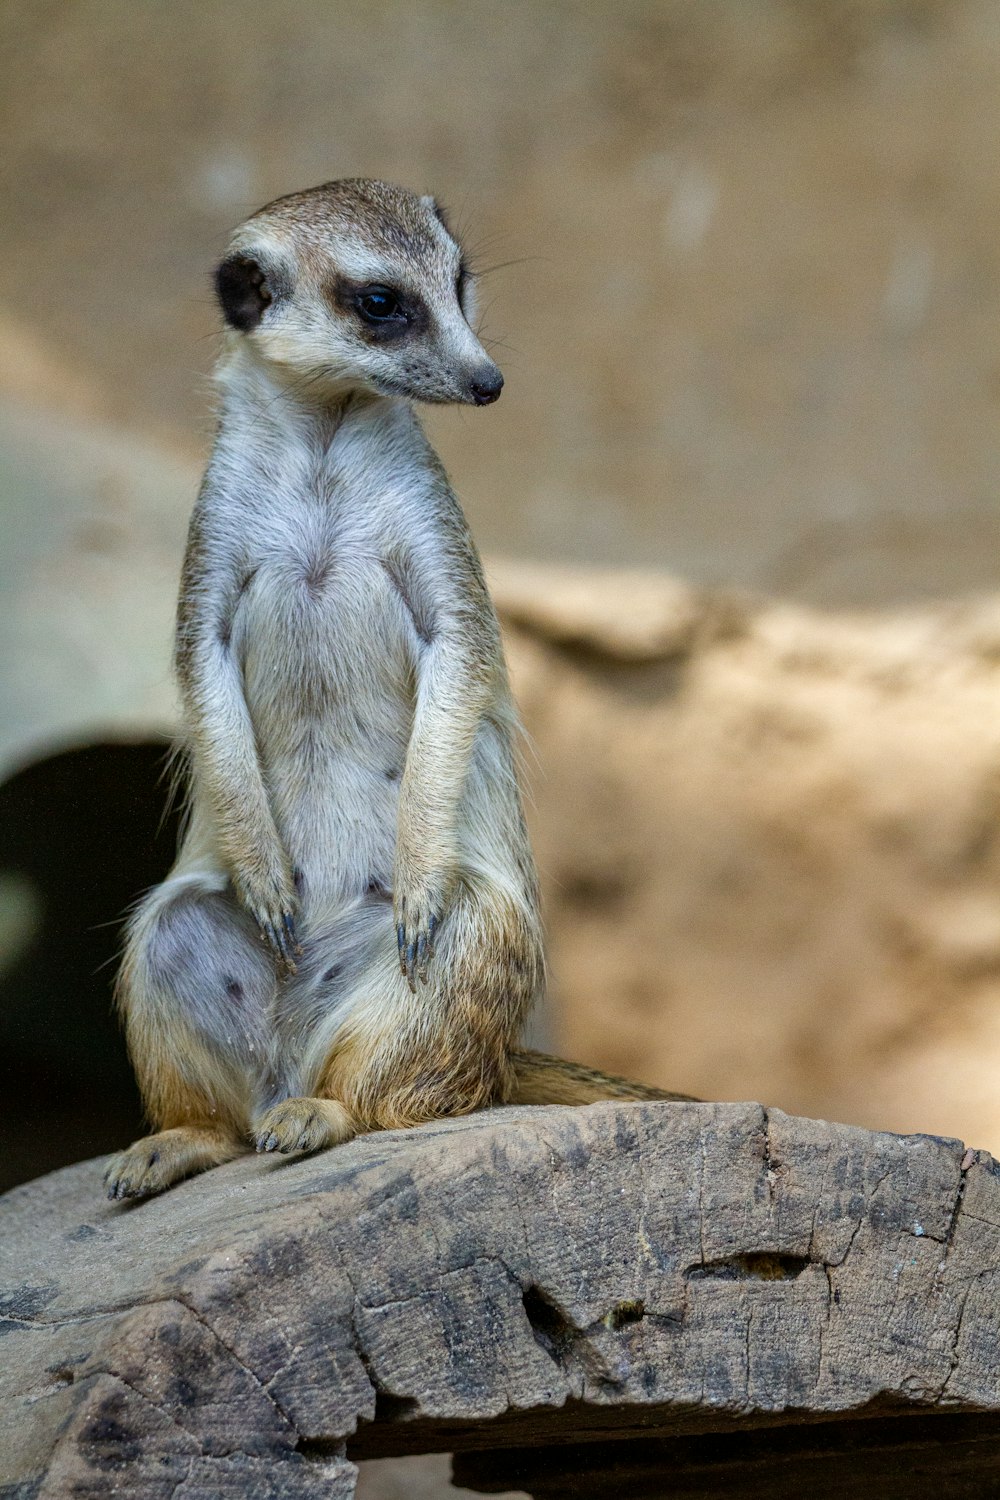 a small meerkat sitting on top of a piece of wood